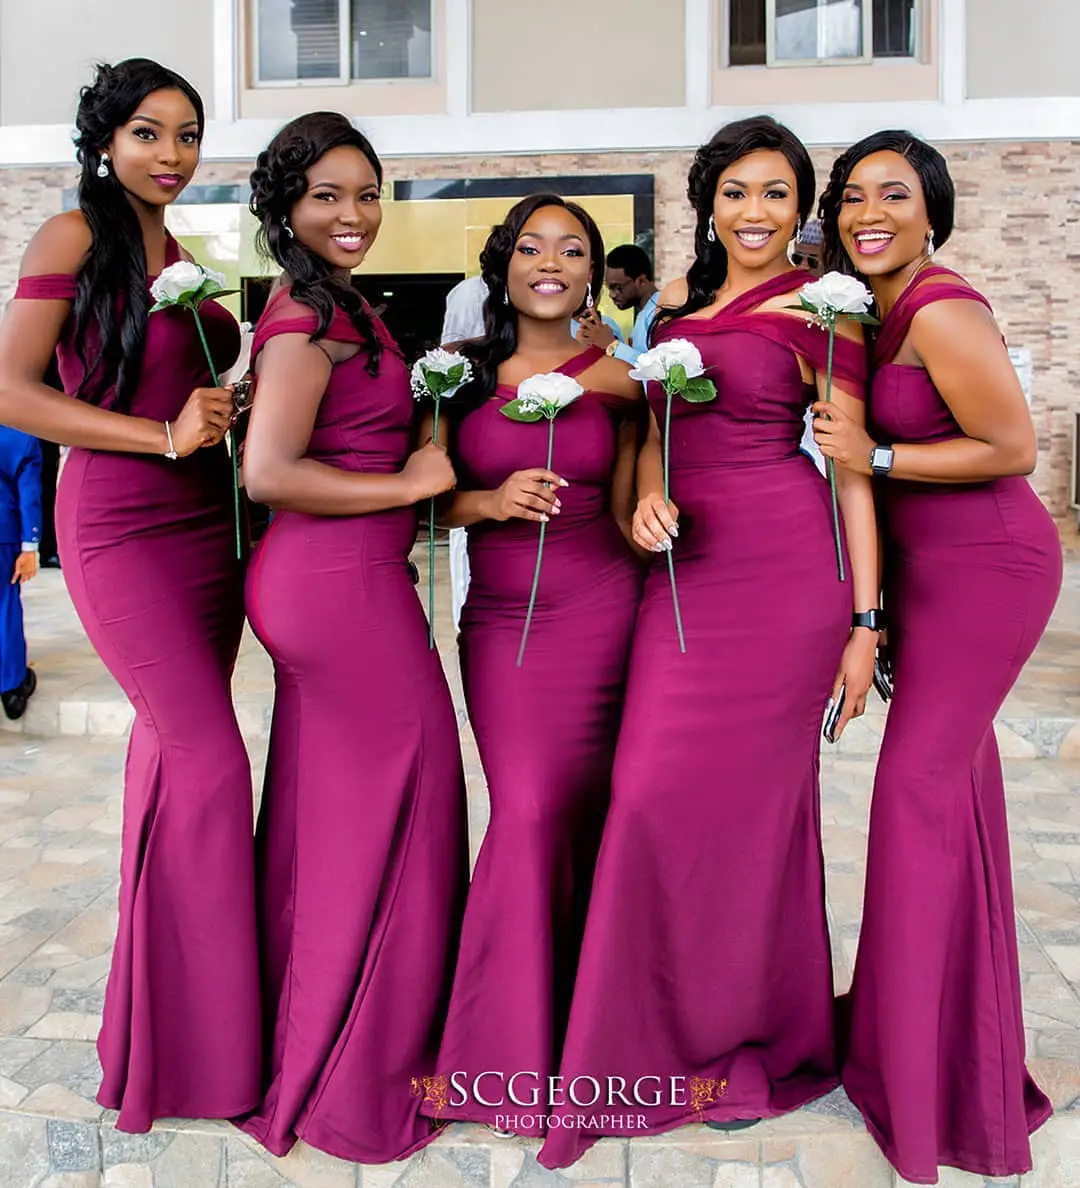 The Bride's Entourage In Beautiful Bridesmaids Styles